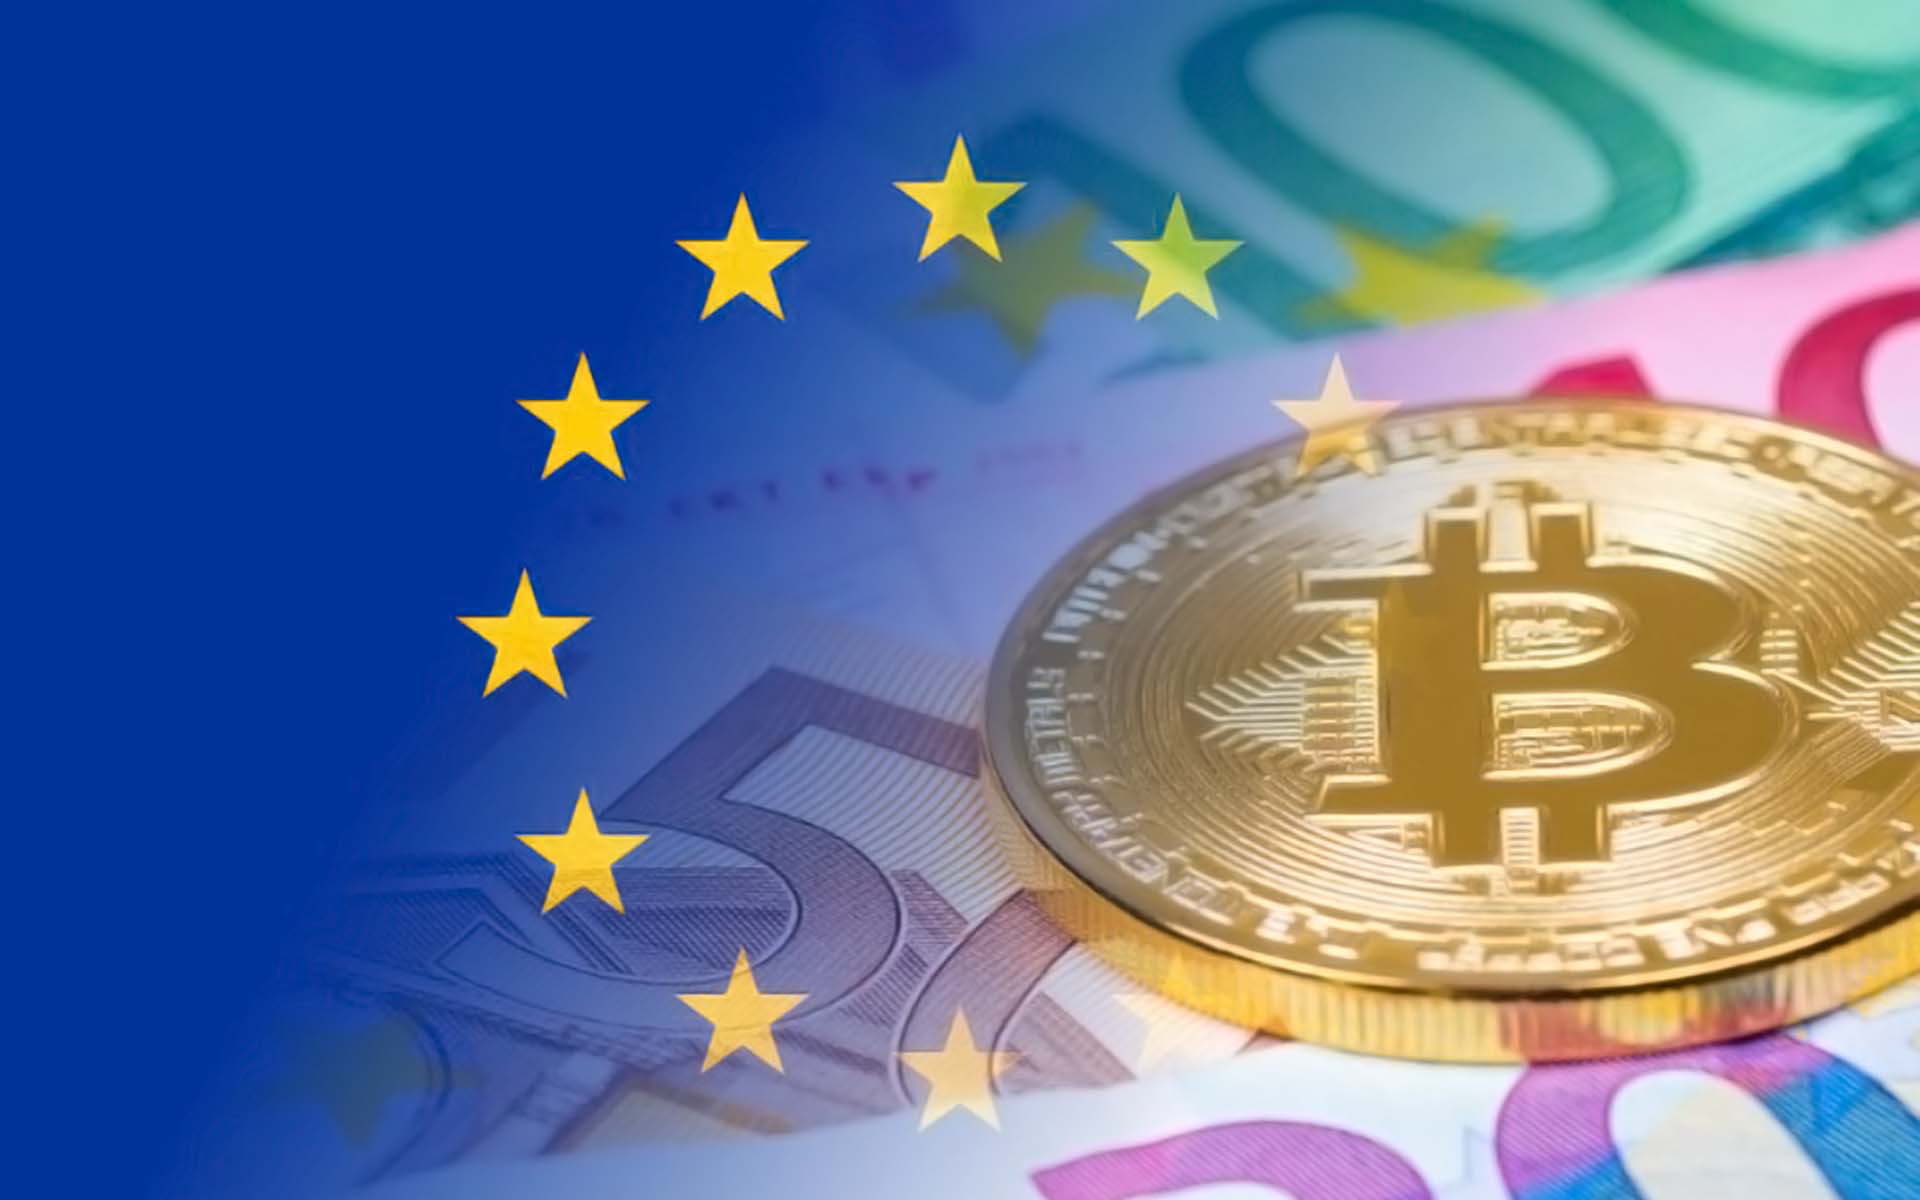 How to Buy Bitcoin in Europe: Guide on Buying BTC in 